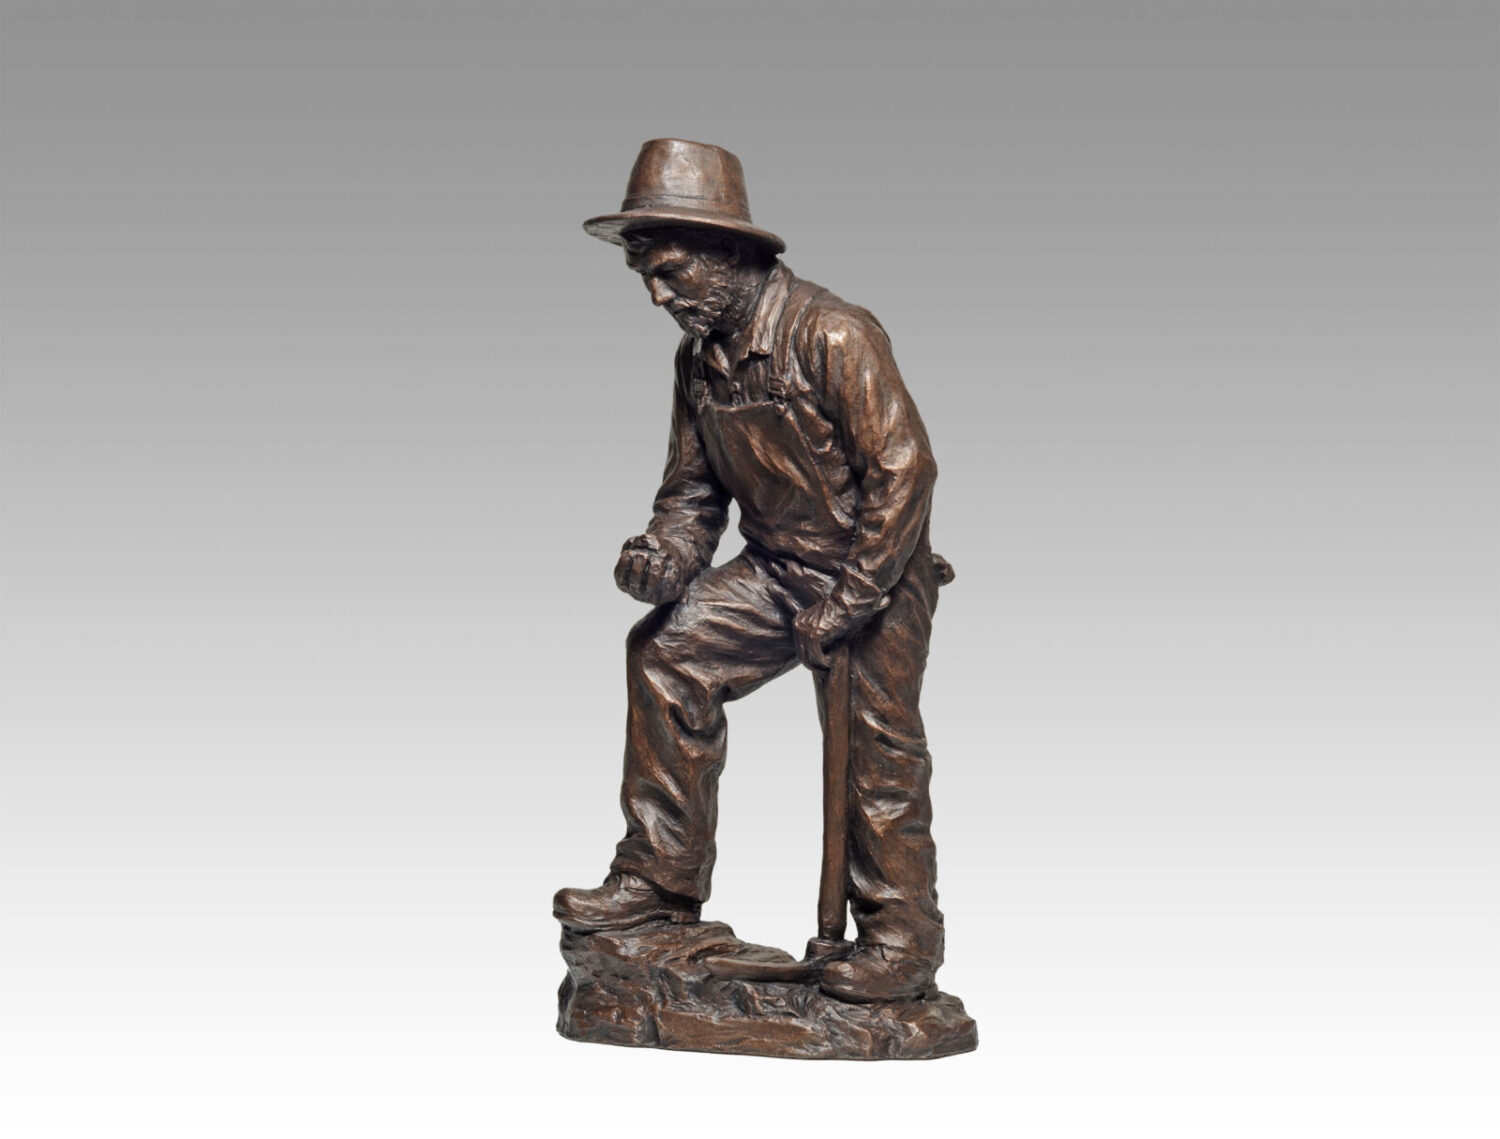 Gallery, New Prospects, $325 CAD, Metal Infused, 16 ¾” H, Edition 80, Mining Sculpture of prospector, Sculptor Tyler Fauvelle